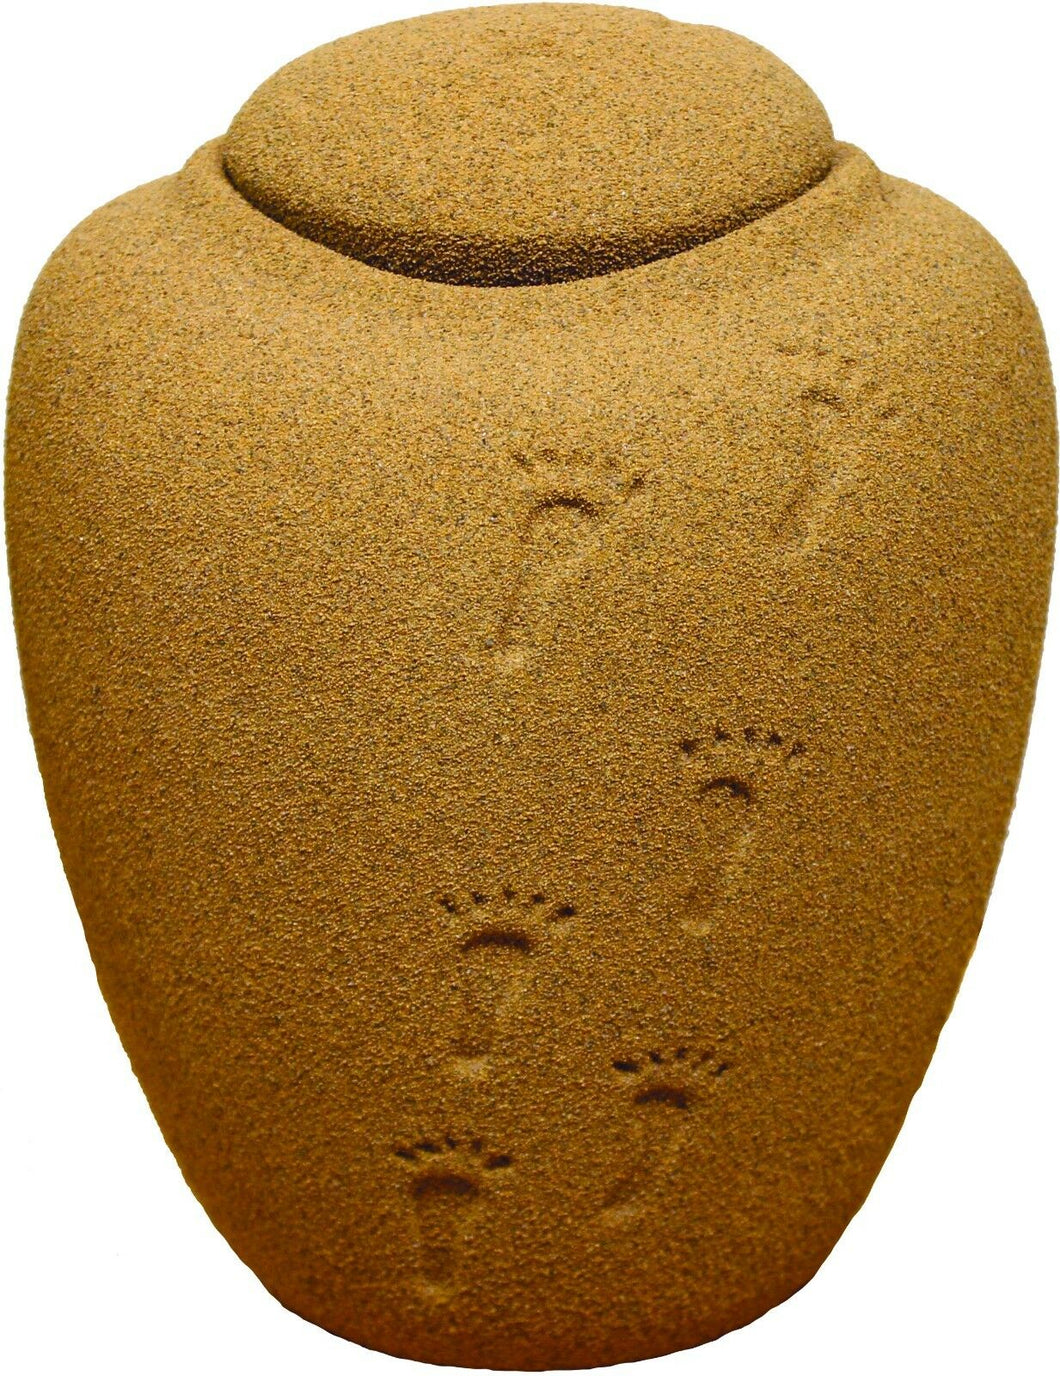 Biodegradable, Oceane Permanent Mini Sand and Gelatin Funeral Cremation Urn